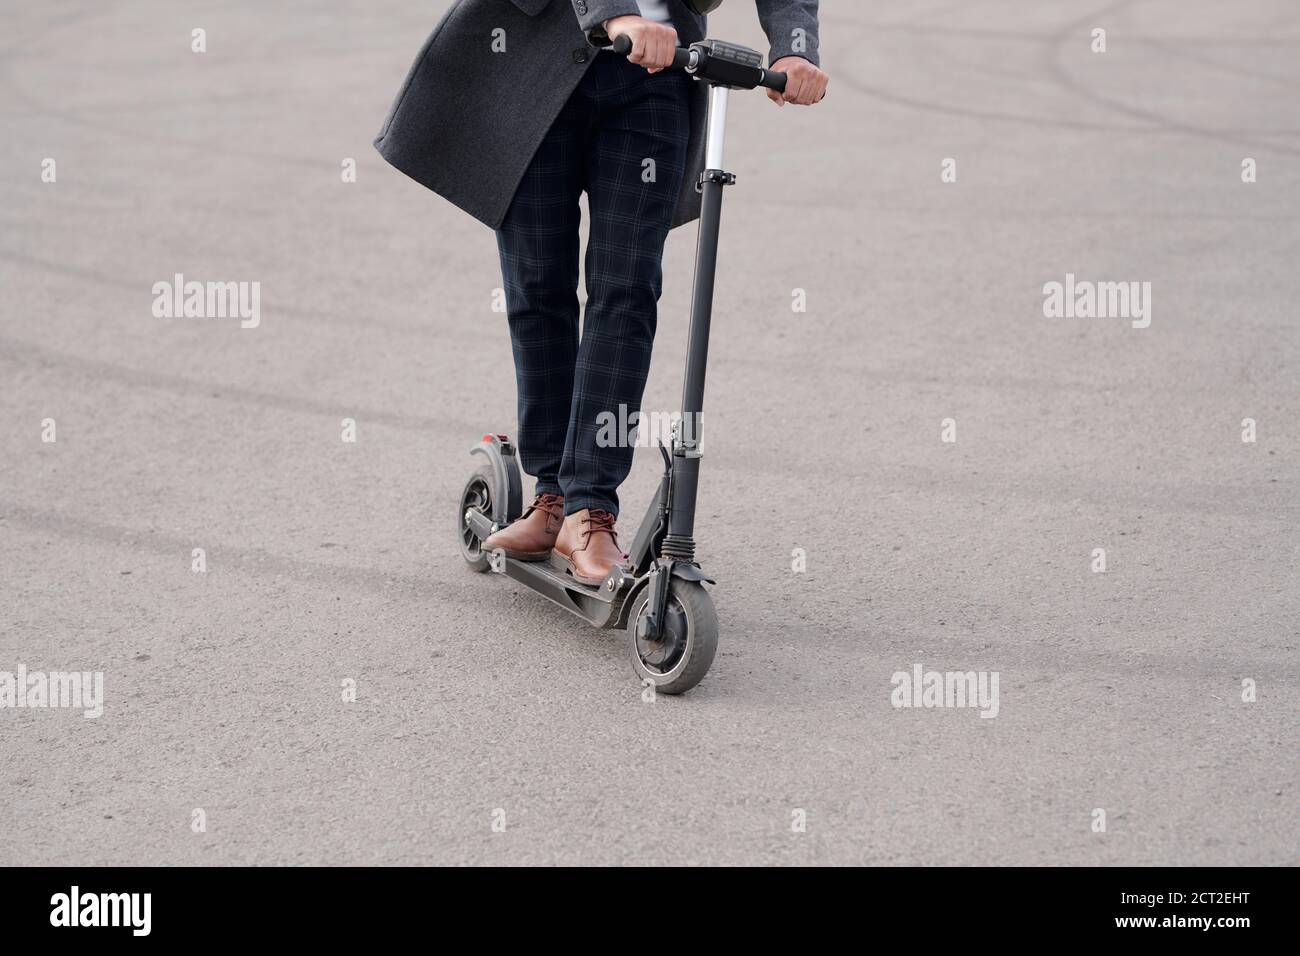 Low section of modern businessman in coat and pants riding electric scooter Stock Photo